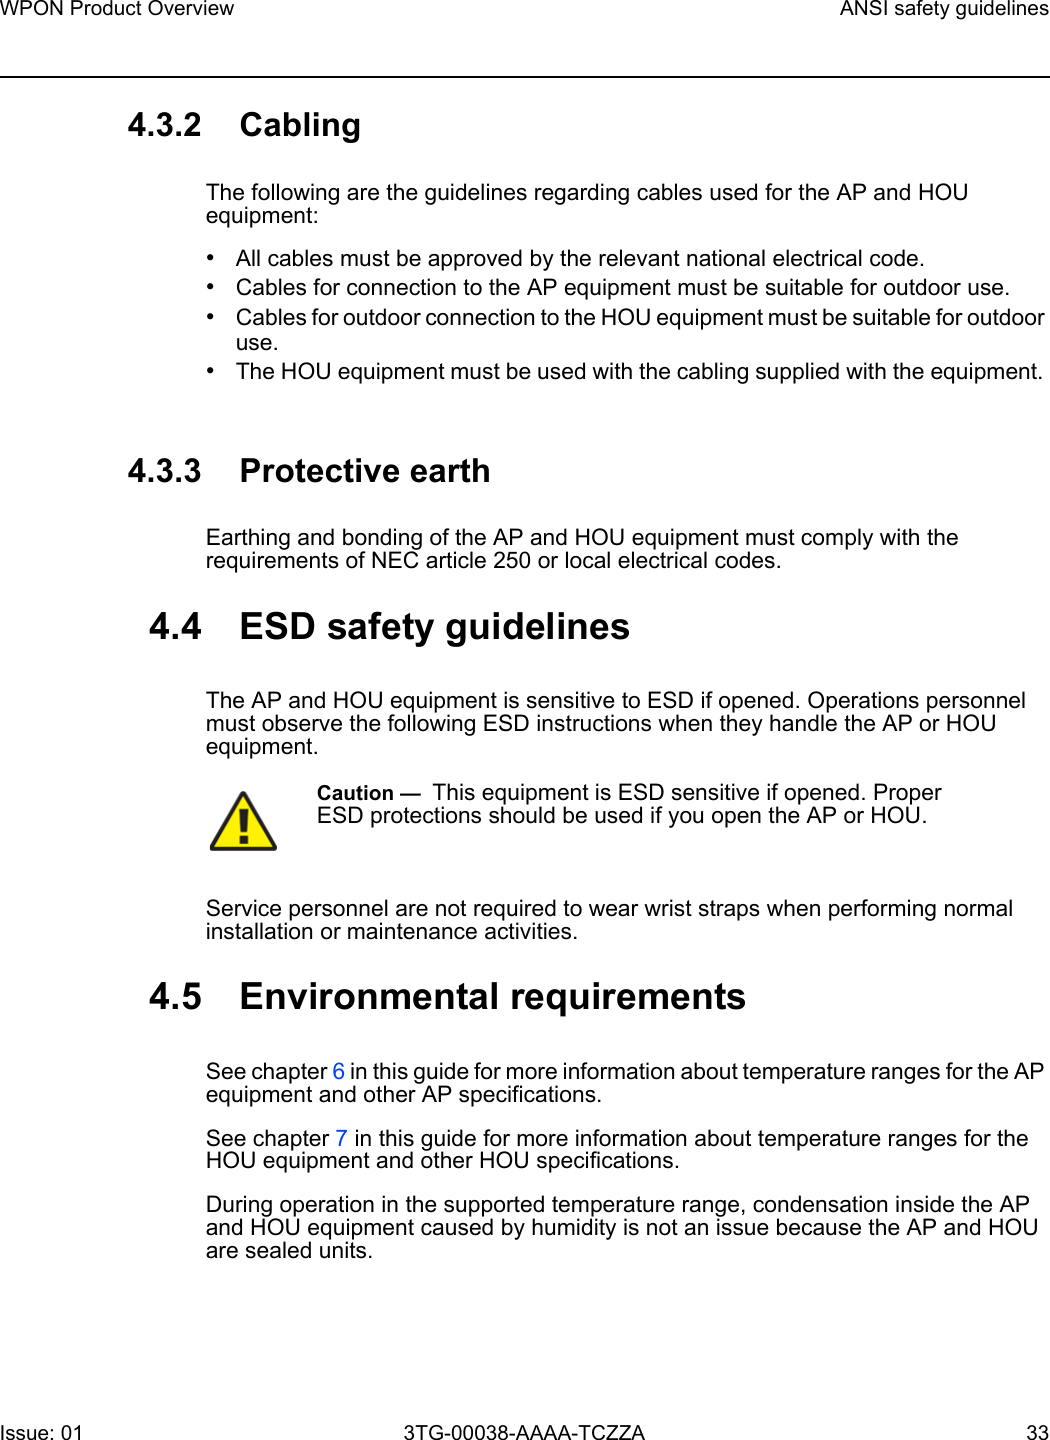 WPON Product Overview ANSI safety guidelinesIssue: 01 3TG-00038-AAAA-TCZZA 33 4.3.2 CablingThe following are the guidelines regarding cables used for the AP and HOU equipment:•All cables must be approved by the relevant national electrical code.•Cables for connection to the AP equipment must be suitable for outdoor use.•Cables for outdoor connection to the HOU equipment must be suitable for outdoor use.•The HOU equipment must be used with the cabling supplied with the equipment. 4.3.3 Protective earthEarthing and bonding of the AP and HOU equipment must comply with the requirements of NEC article 250 or local electrical codes.4.4 ESD safety guidelinesThe AP and HOU equipment is sensitive to ESD if opened. Operations personnel must observe the following ESD instructions when they handle the AP or HOU equipment. Service personnel are not required to wear wrist straps when performing normal installation or maintenance activities.4.5 Environmental requirementsSee chapter 6 in this guide for more information about temperature ranges for the AP equipment and other AP specifications. See chapter 7 in this guide for more information about temperature ranges for the HOU equipment and other HOU specifications. During operation in the supported temperature range, condensation inside the AP and HOU equipment caused by humidity is not an issue because the AP and HOU are sealed units.Caution —  This equipment is ESD sensitive if opened. Proper ESD protections should be used if you open the AP or HOU.